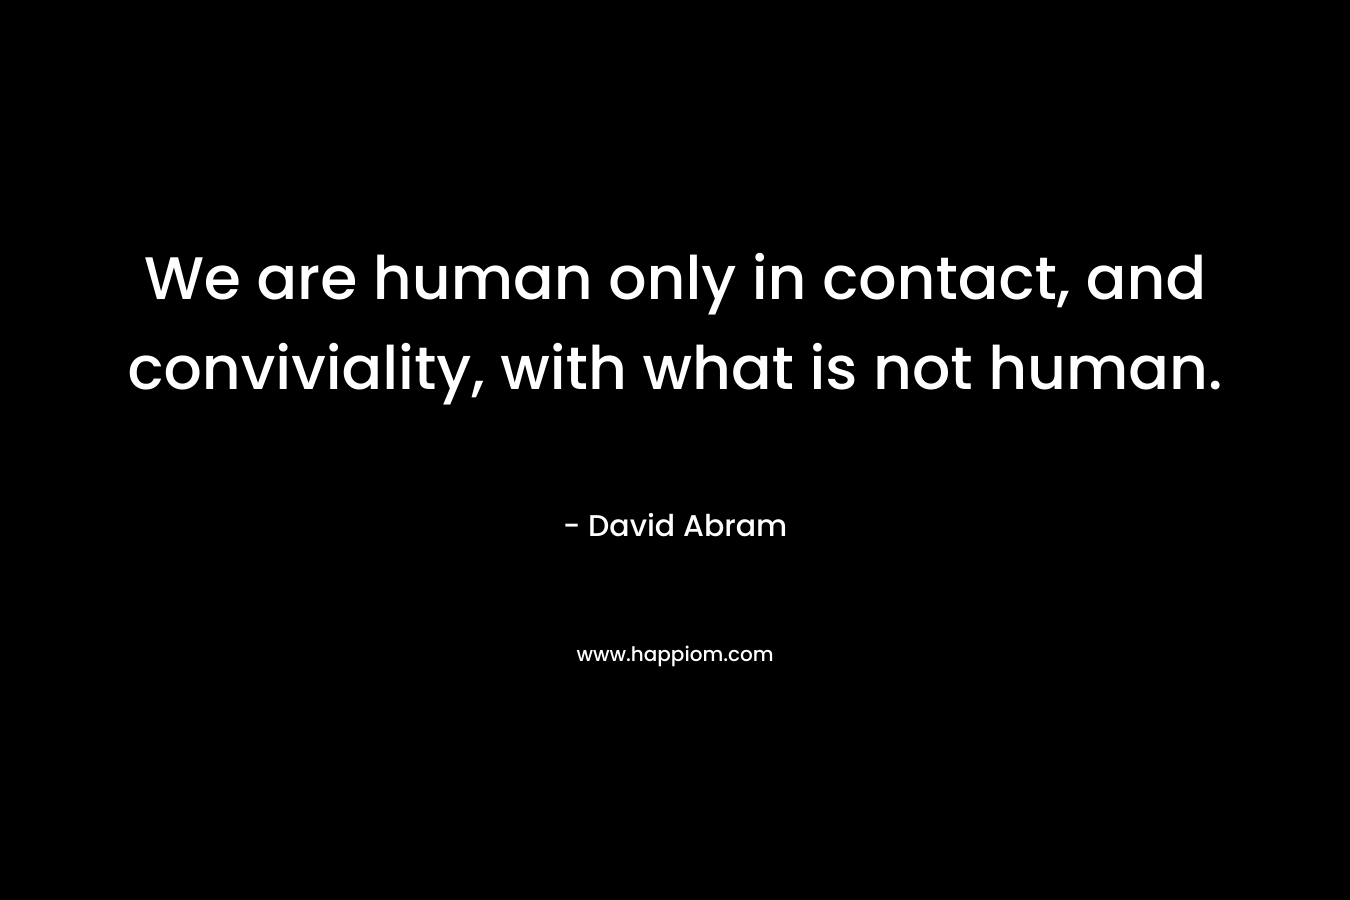 We are human only in contact, and conviviality, with what is not human.